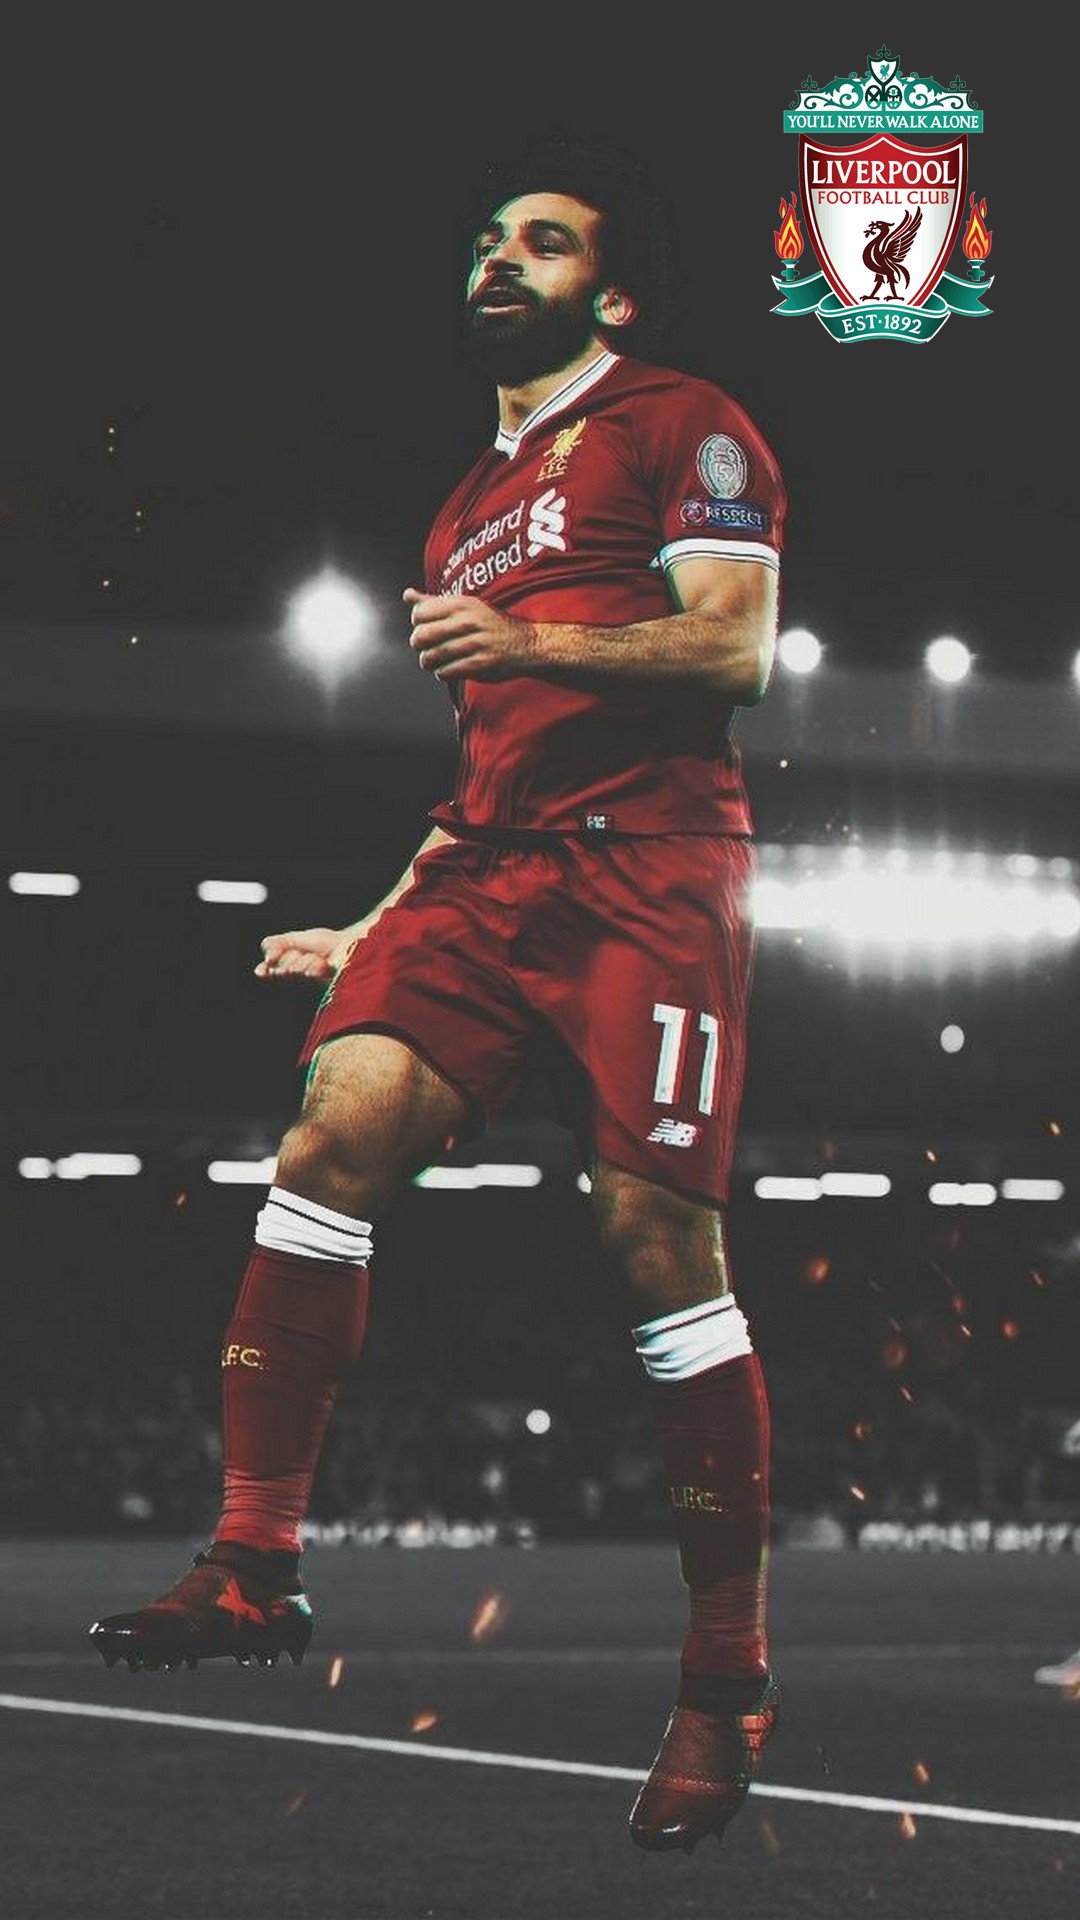 Mo Salah Wallpaper For iPhone with resolution 1080X1920 pixel. You can make this wallpaper for your iPhone 5, 6, 7, 8, X backgrounds, Mobile Screensaver, or iPad Lock Screen